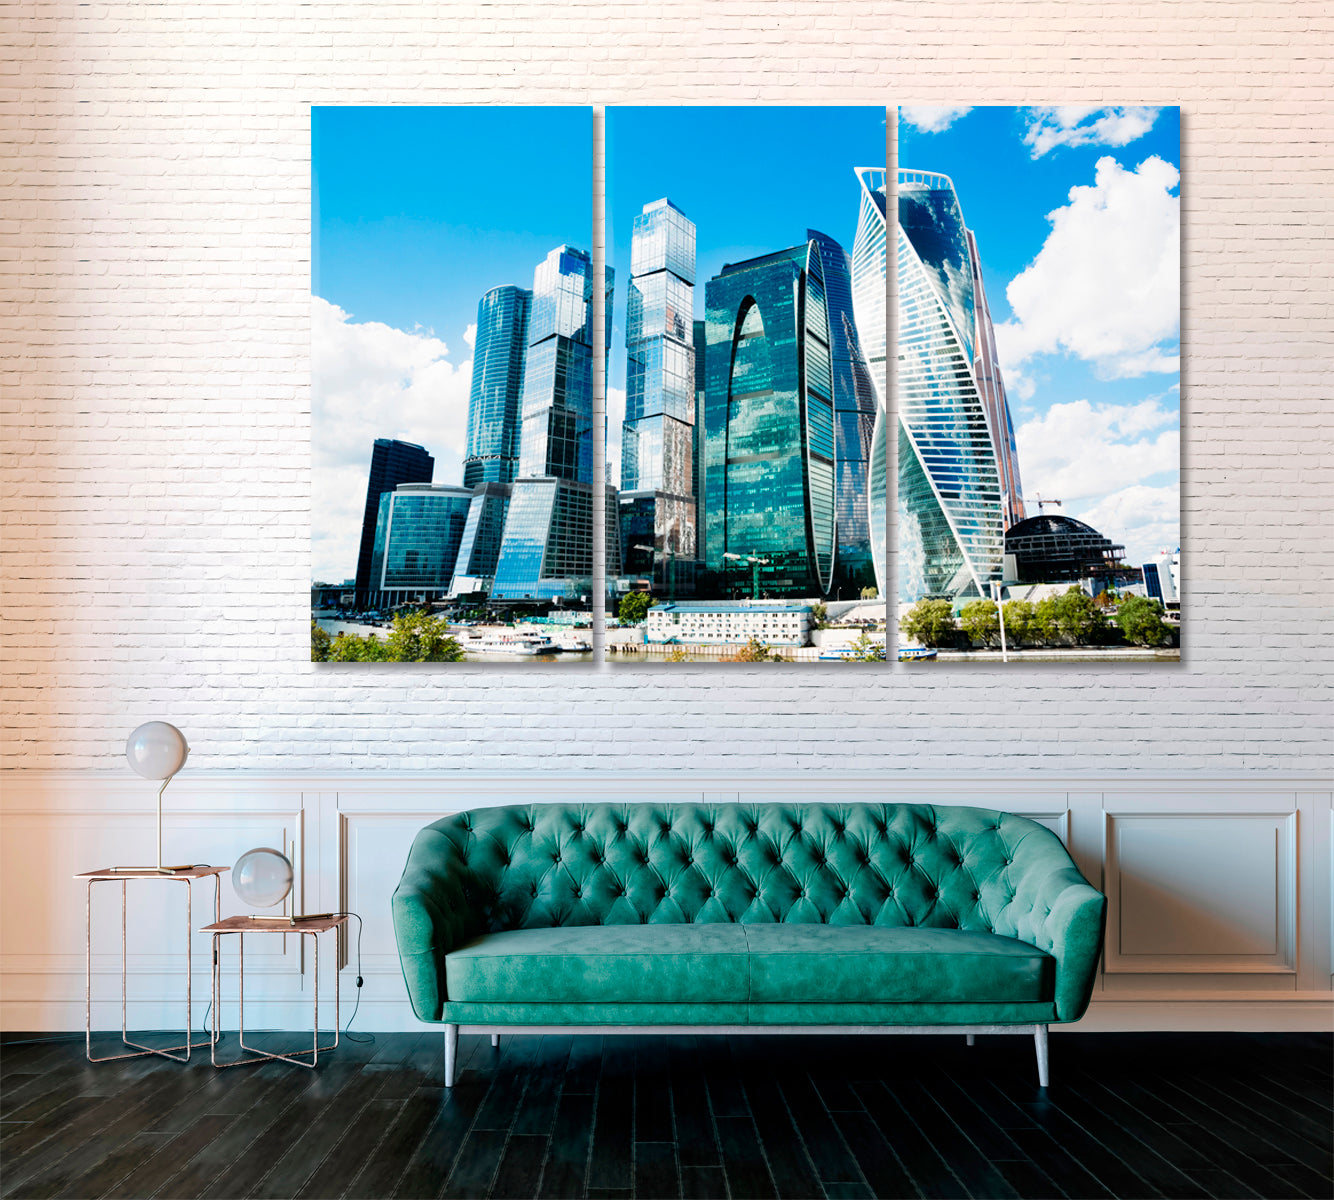 Moscow City Buildings Canvas Print ArtLexy 3 Panels 36"x24" inches 